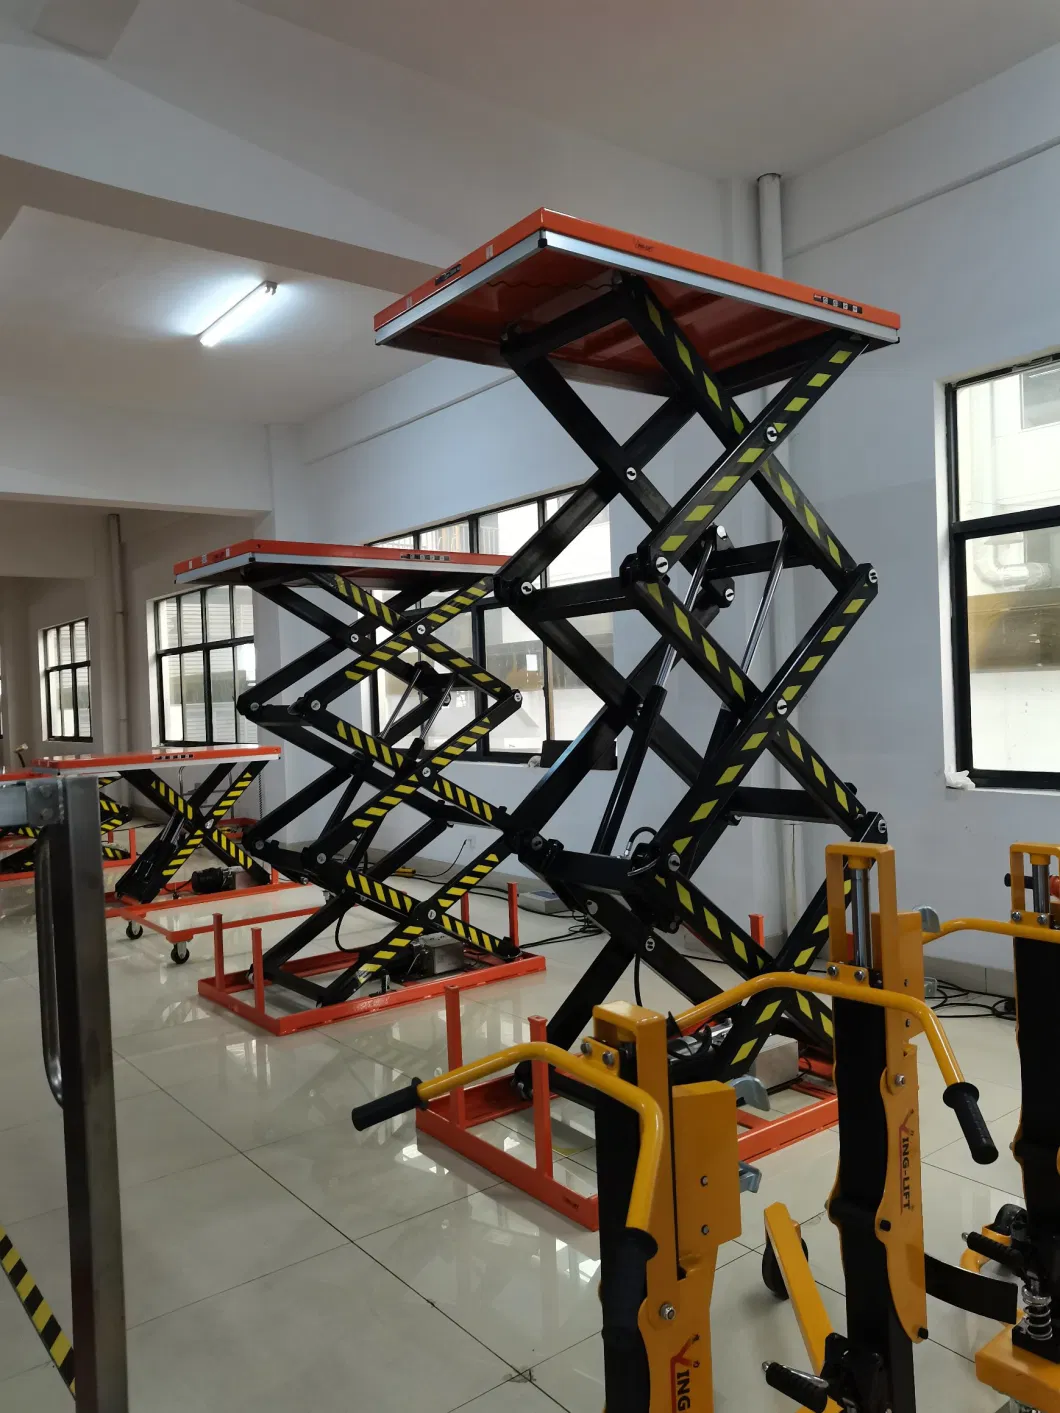 High Quality Lifting Height up to 3m Flip Type Aluminum Manual Stacker (WFH)